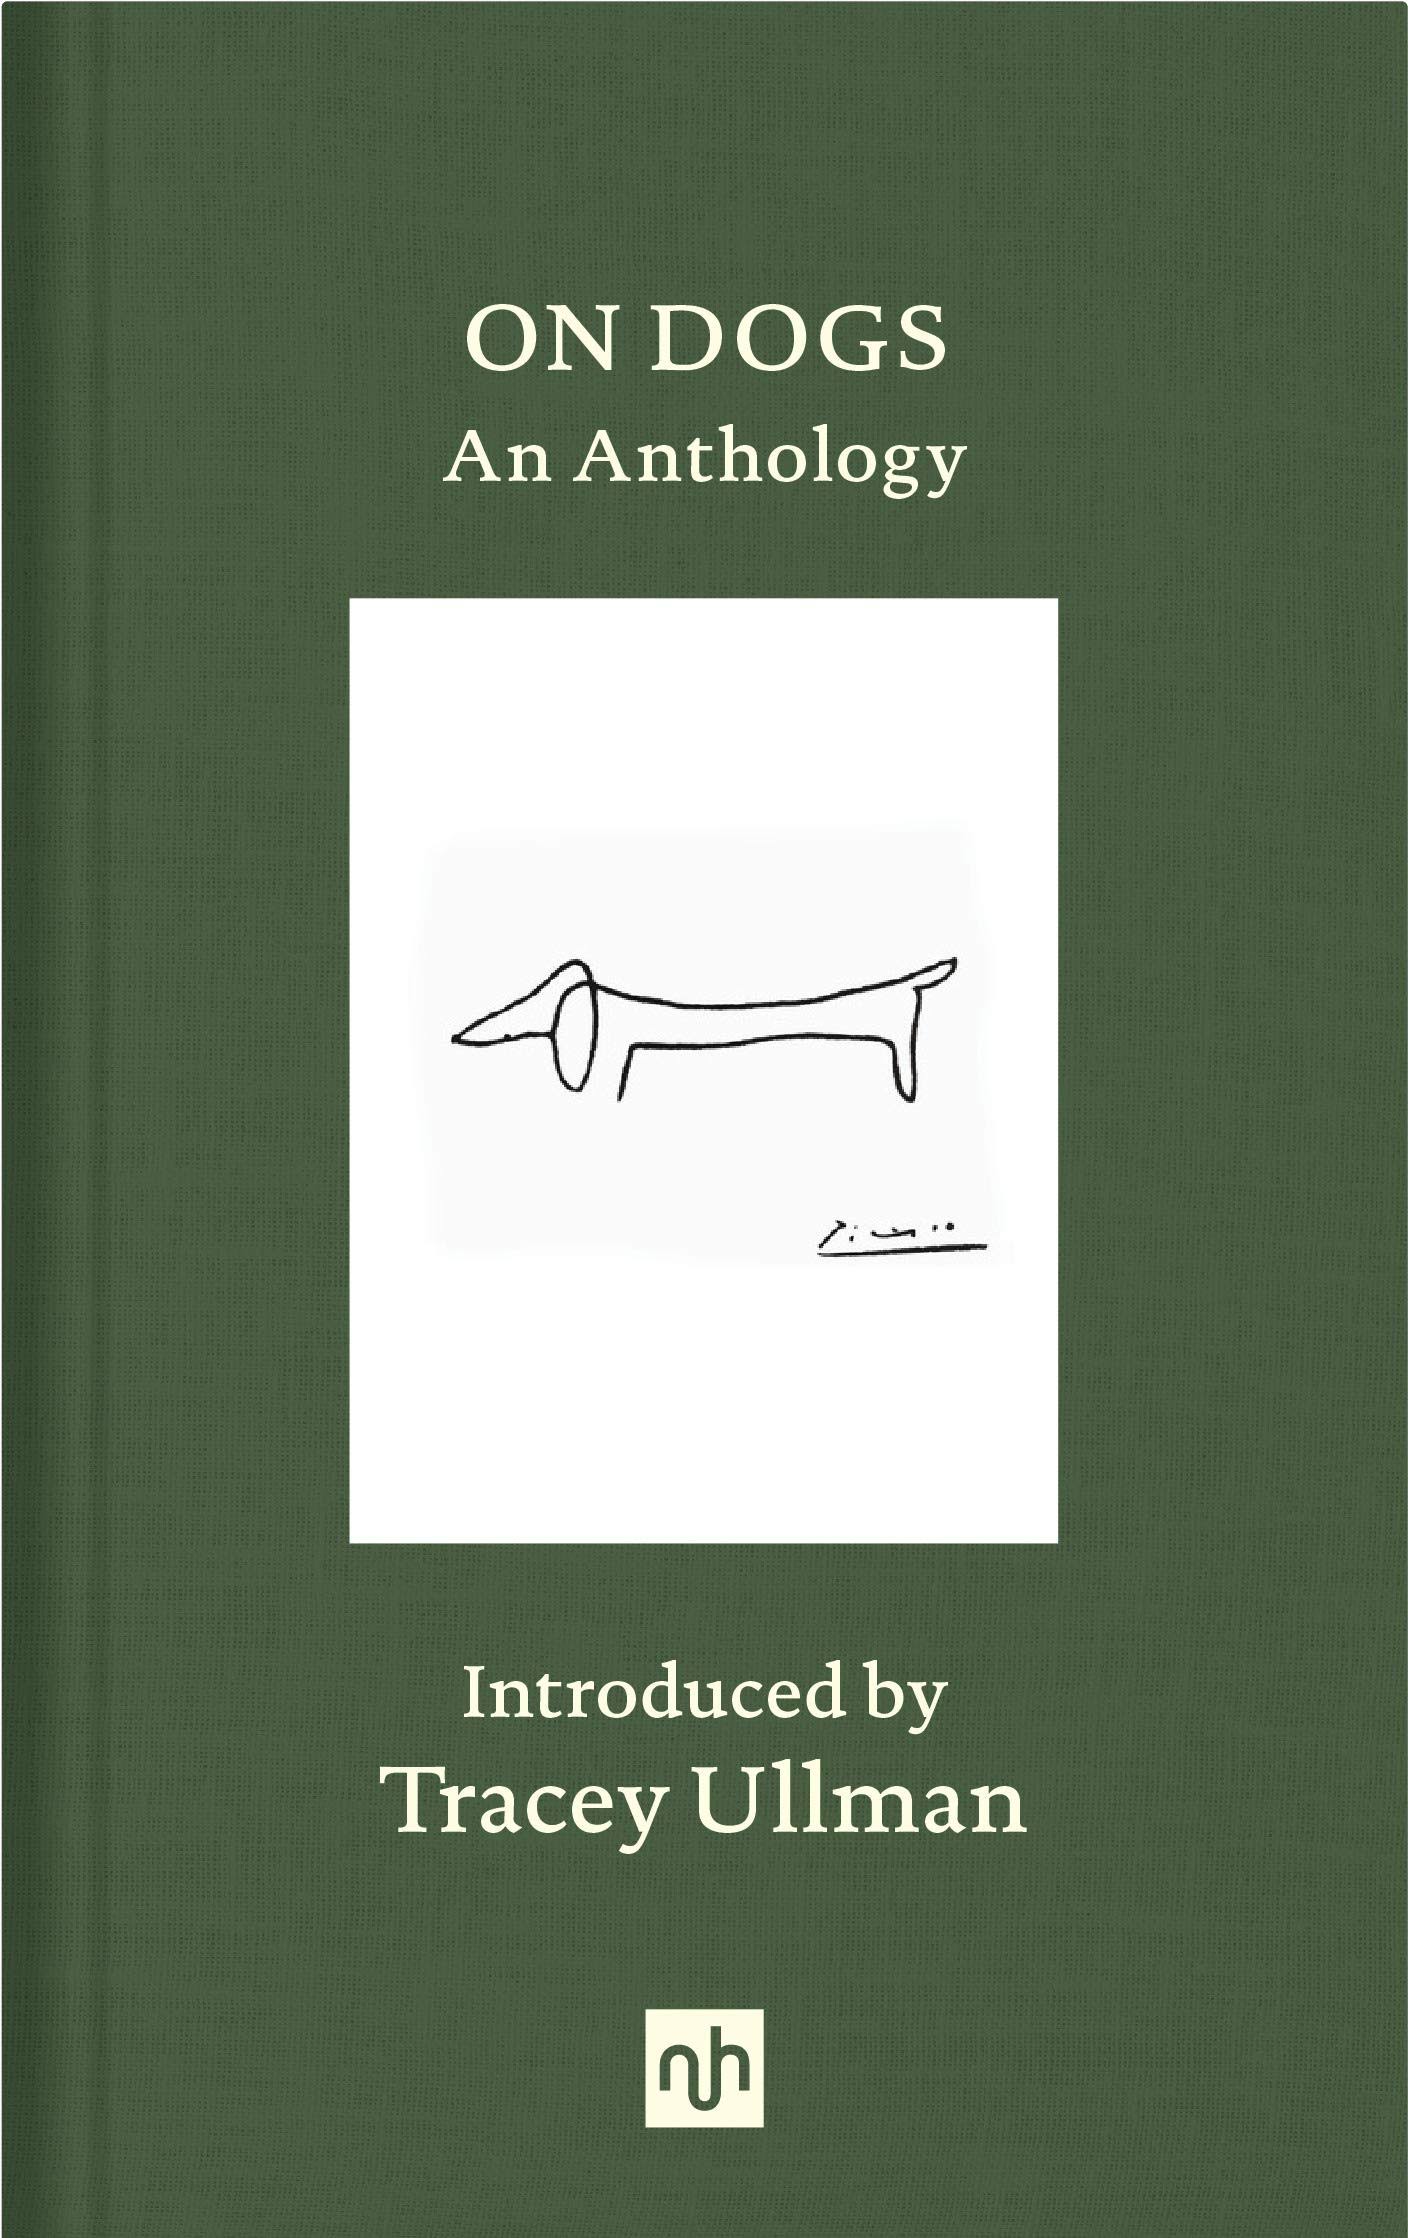 On Dogs: An Anthology [Book]